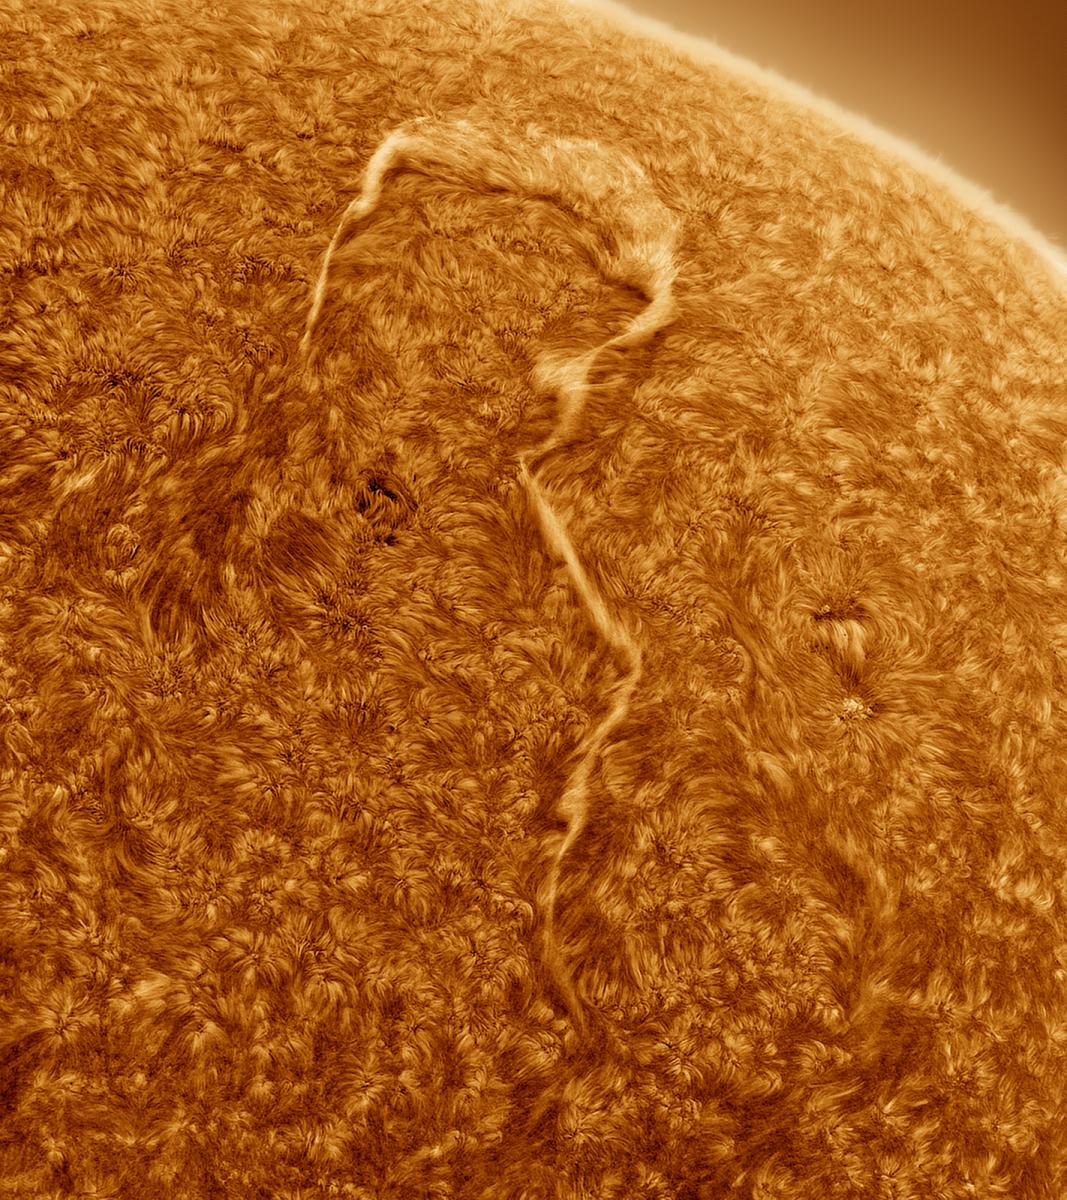 An up close image of the sun with a question mark.